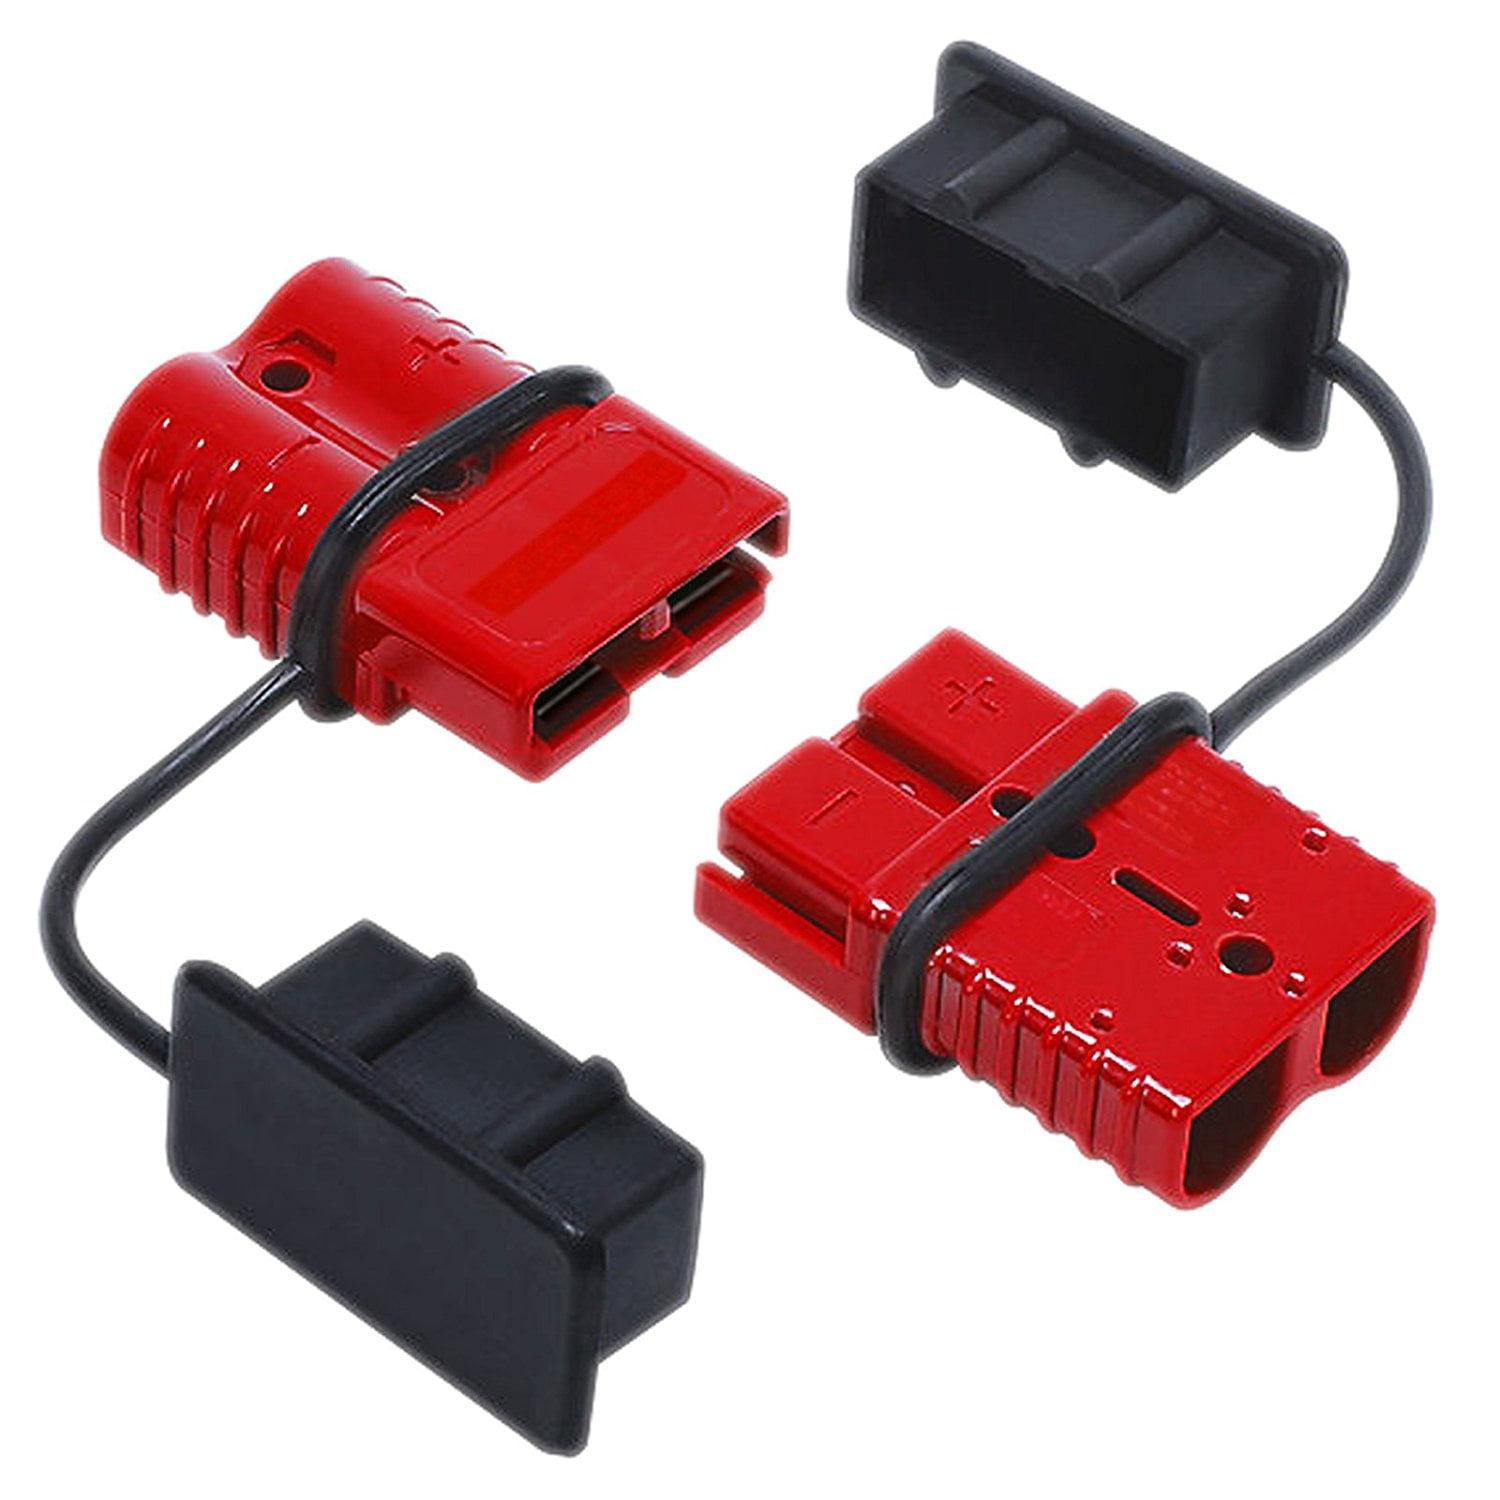 Ruikarhop 175A 600V Red Battery Connector AWG 1/0 Quick Connect Battery Modular Power Connectors for Winch Auto Car Trailer Driver Electrical Devices 1-2 Gauge